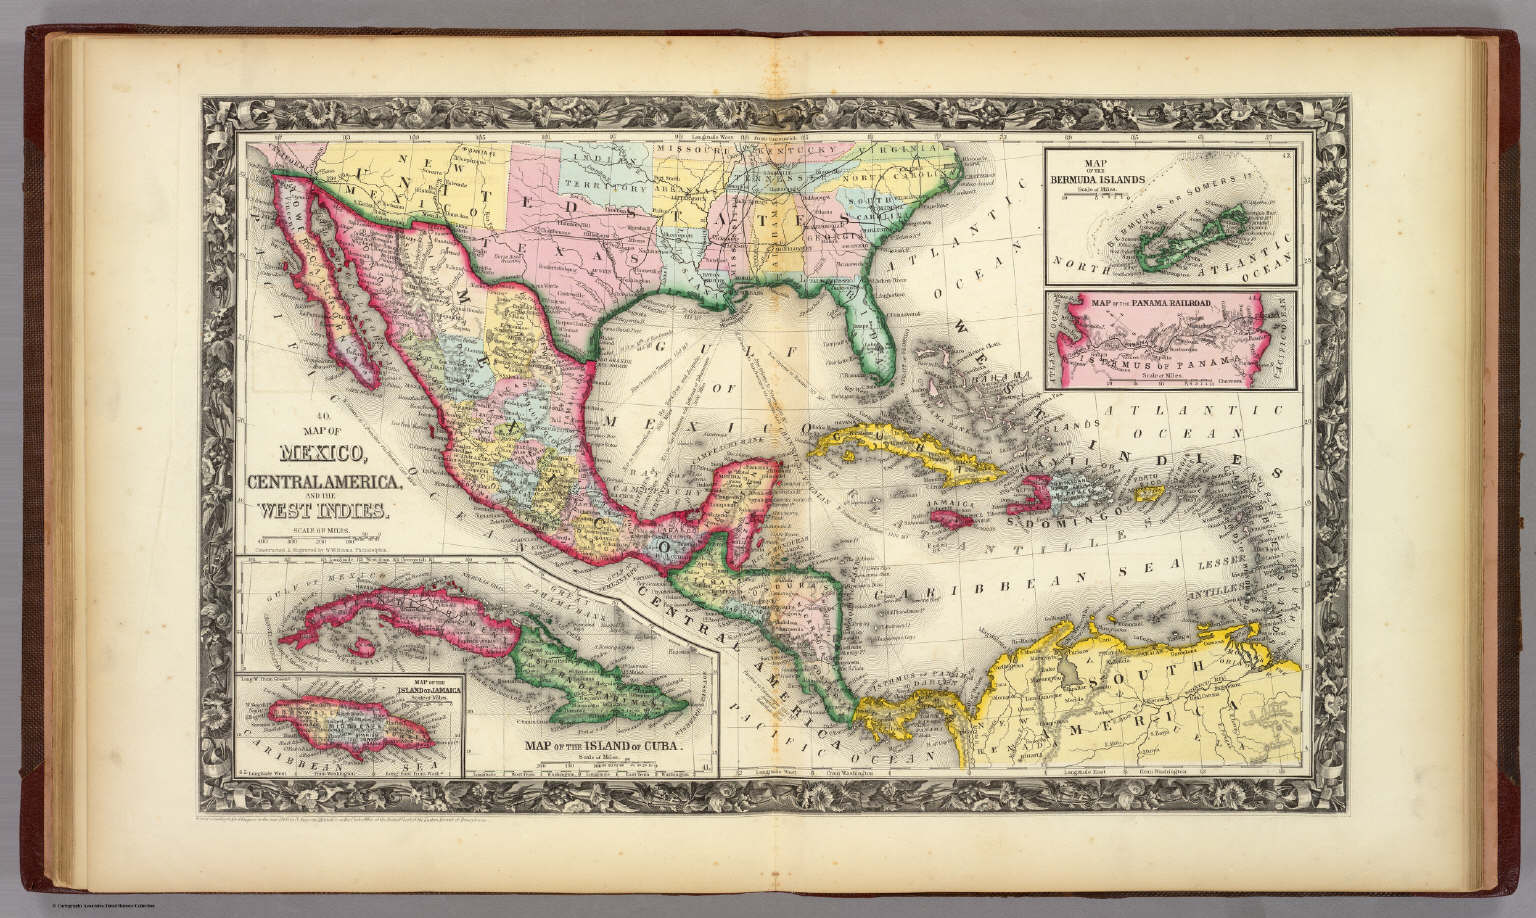 Map Of Mexico Central America And The West Indies David Rumsey Historical Map Collection 9409